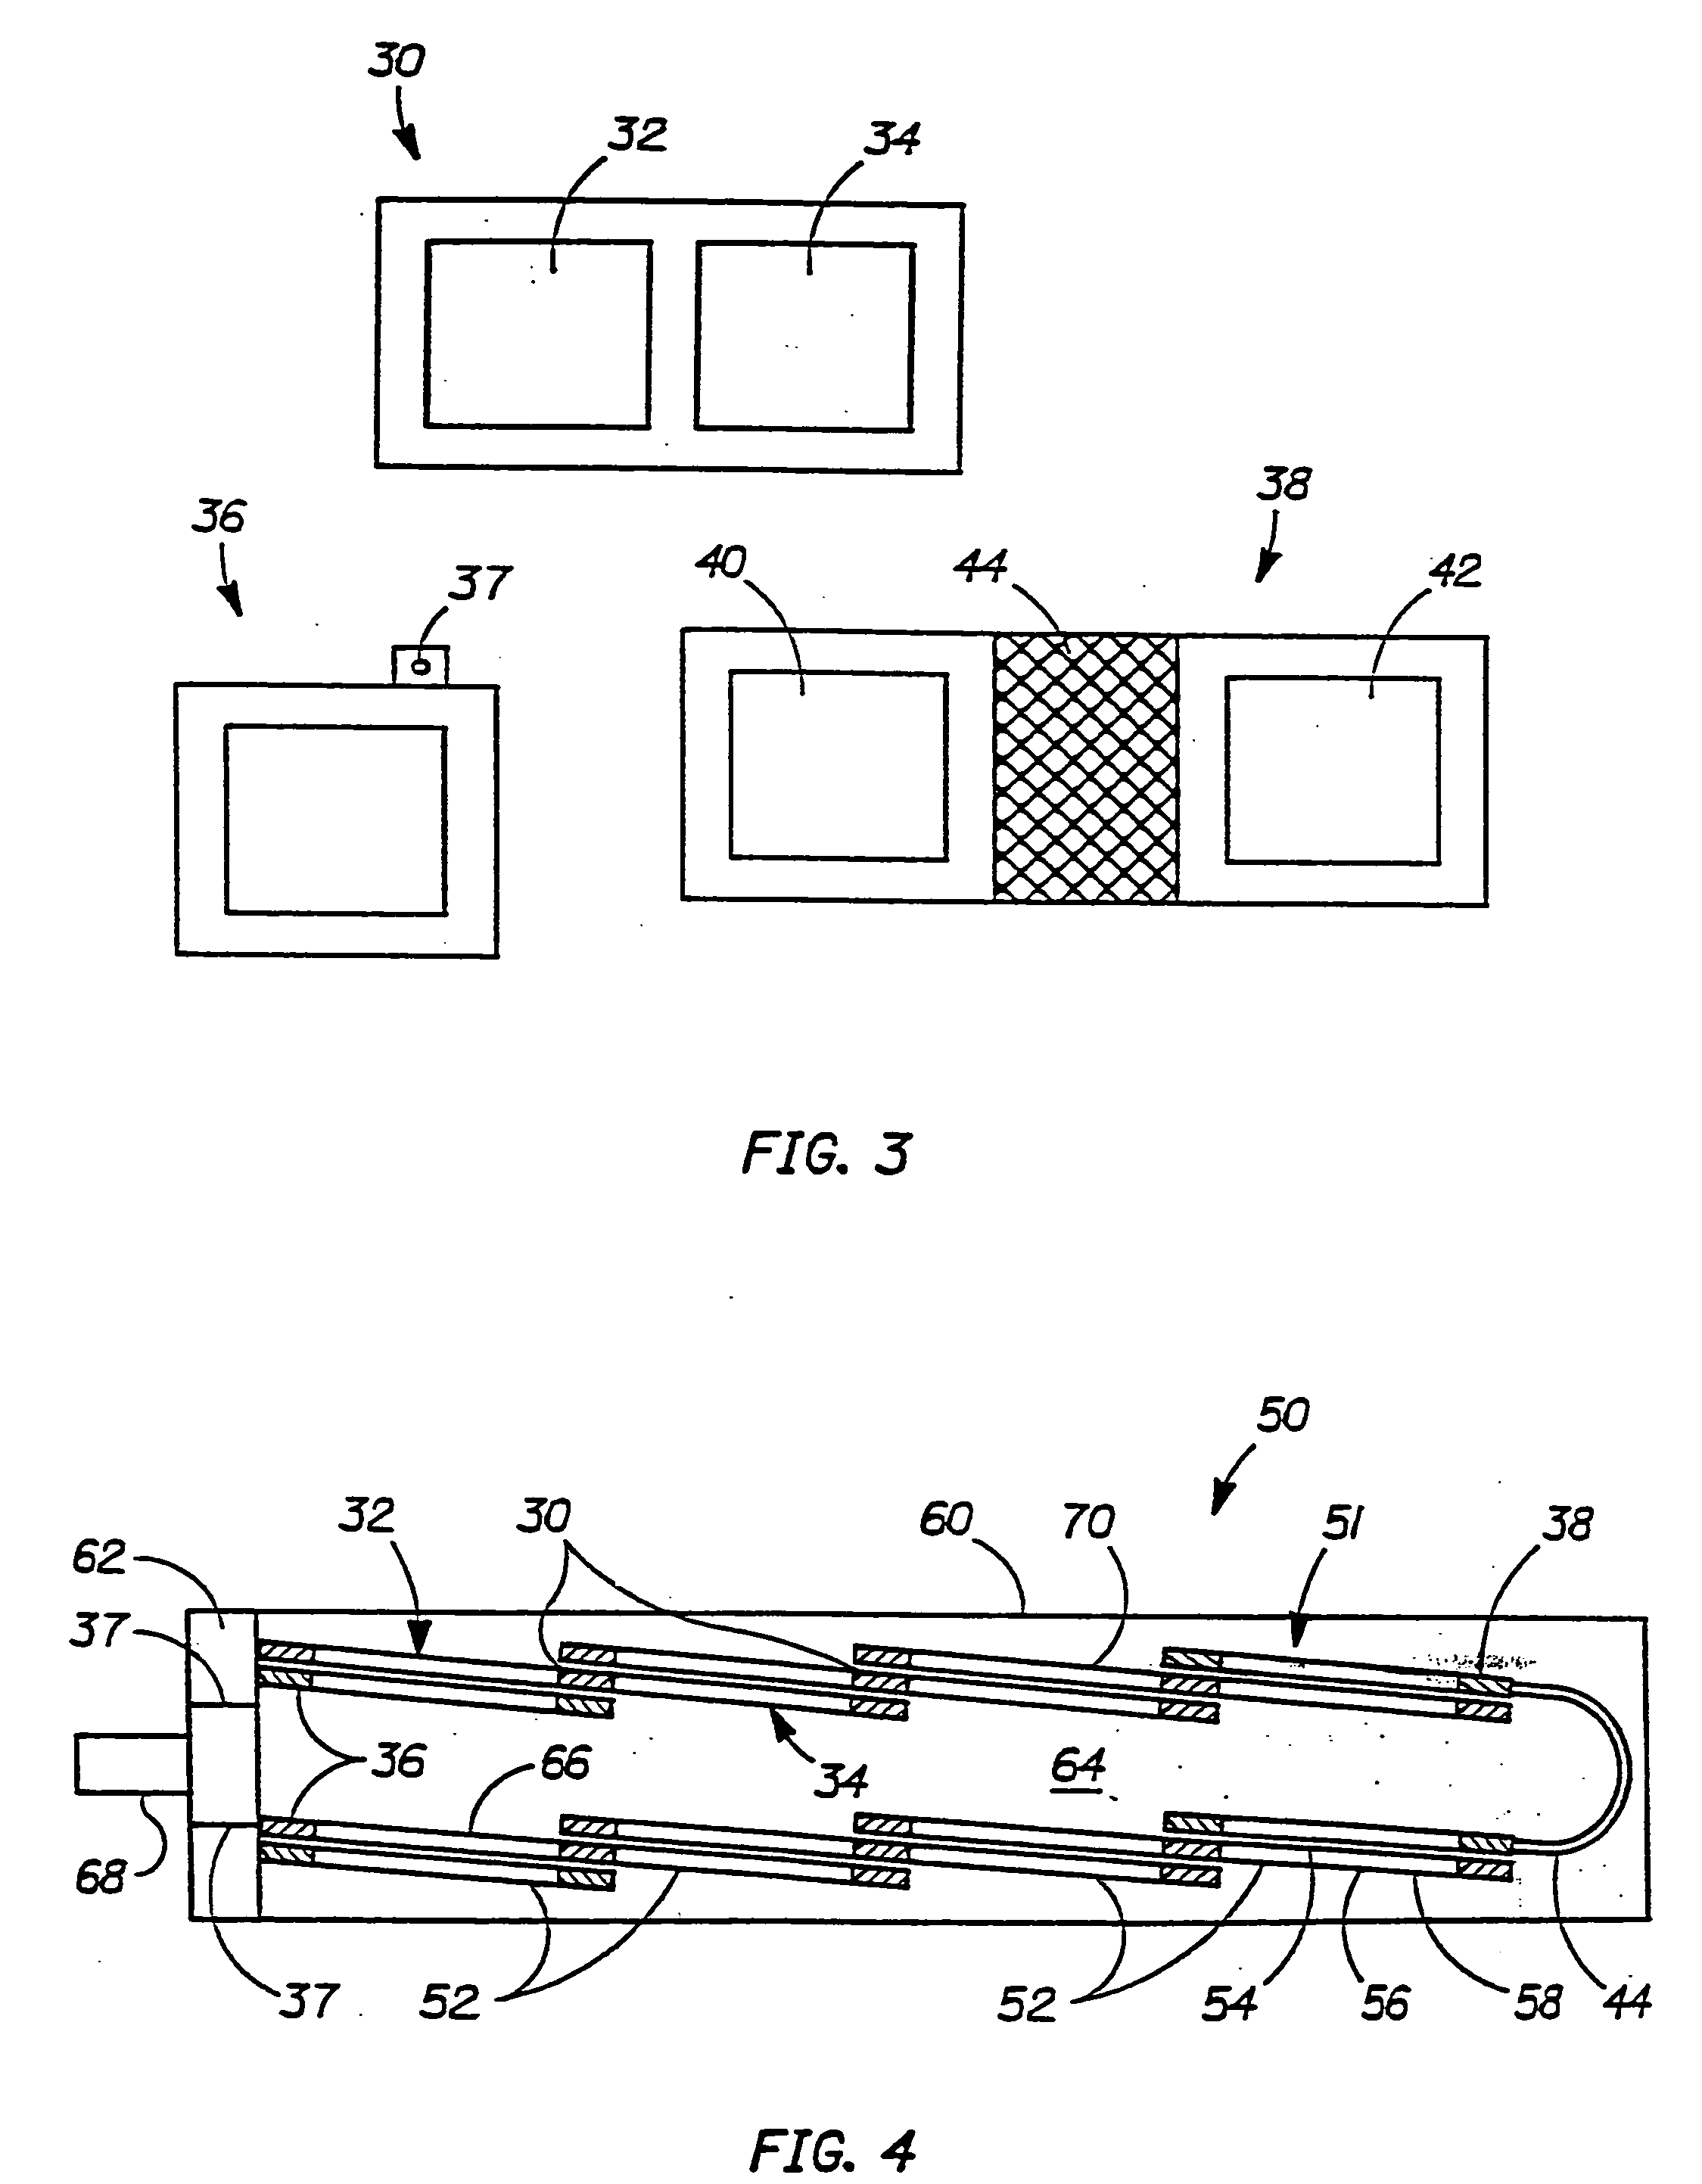 Fuel cell system for low pressure operation